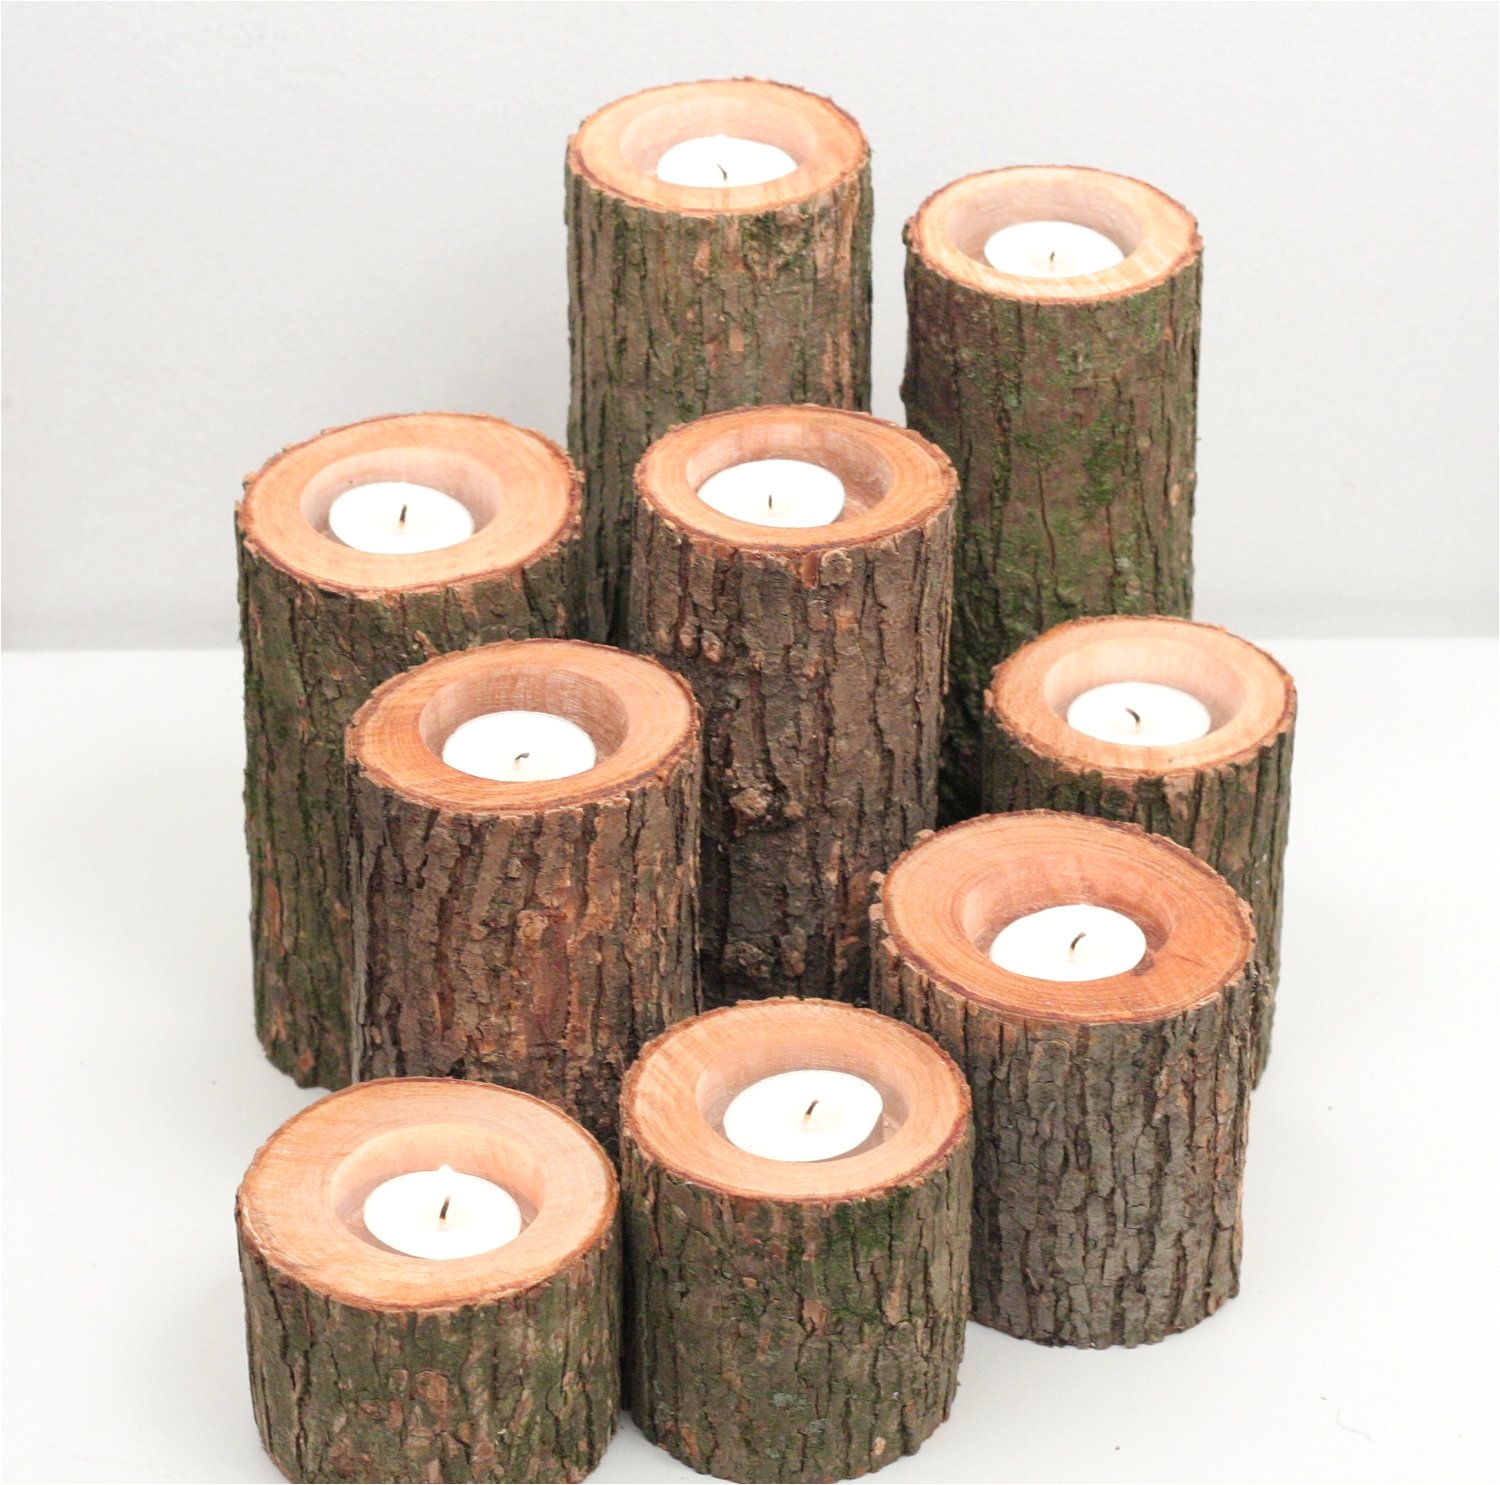 tree branch candle holders i rustic wood candle holders tree slice wooden candle